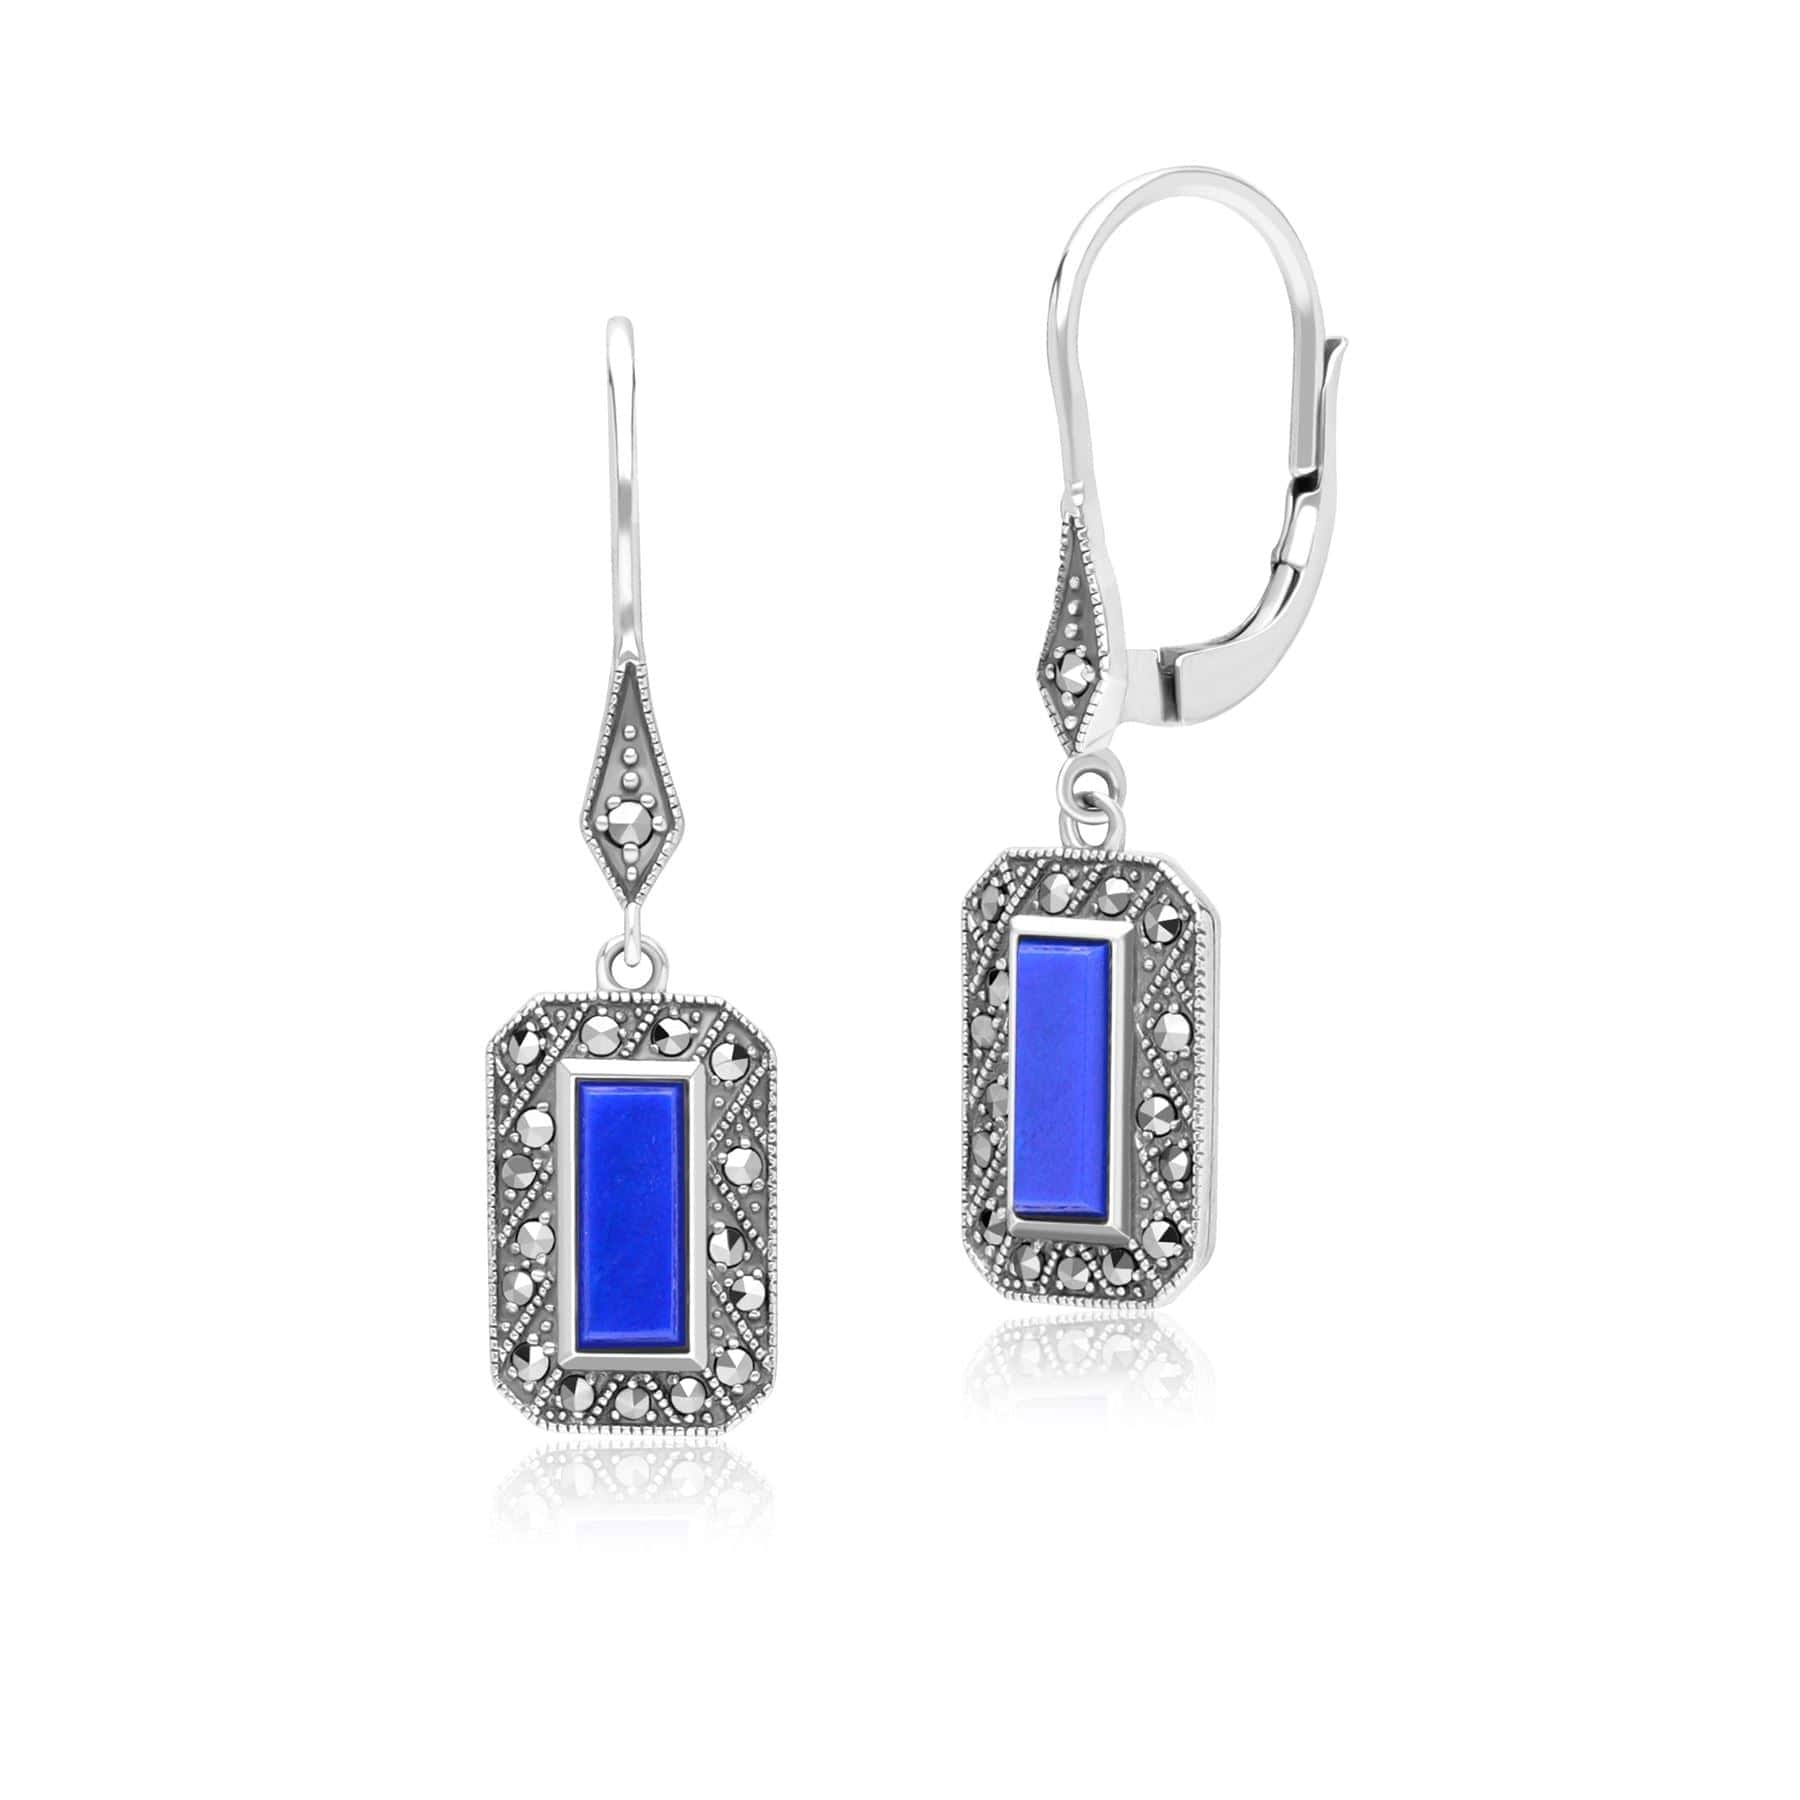 Art Deco Style Rectangle Lapis Lazuli and Marcasite Drop Earrings in Sterling Silver 214E936103925 